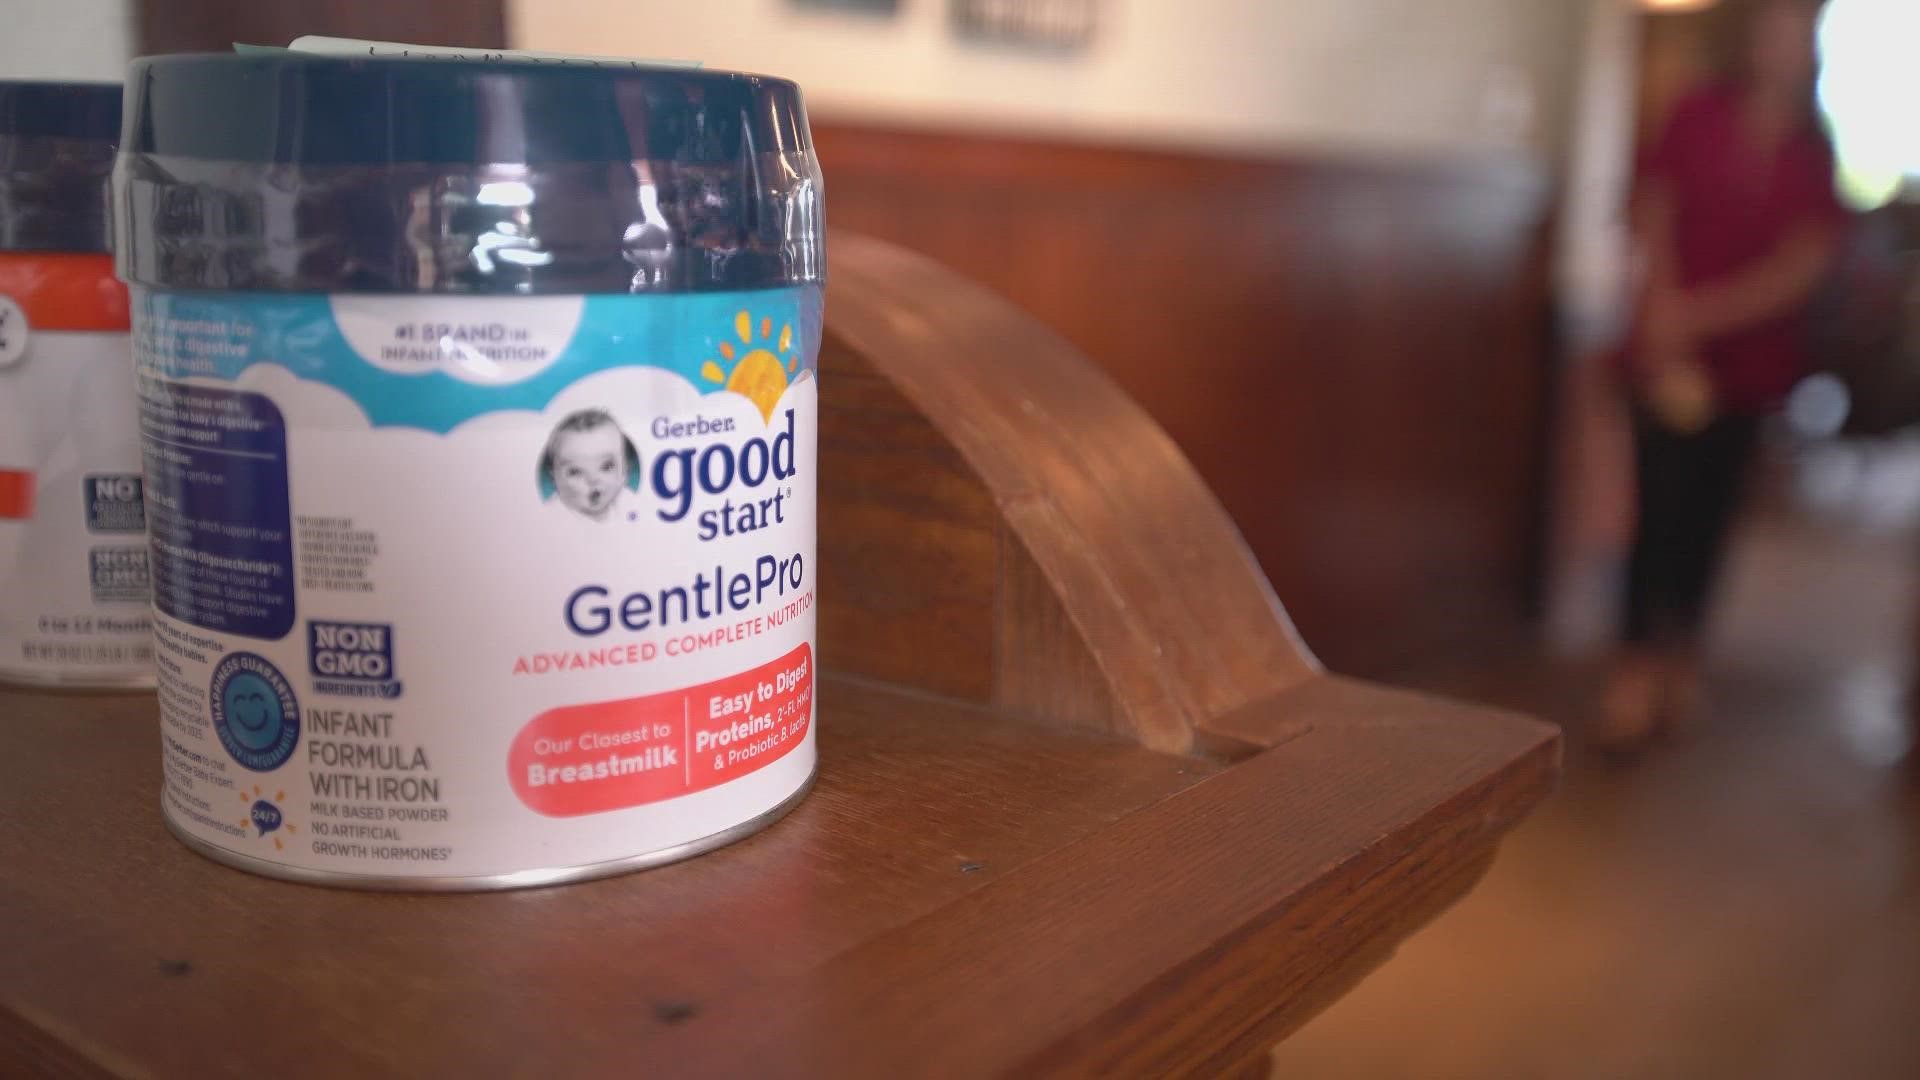 Some parents are stressing about finding baby formula but a restaurant in Mansfield has stepped up to help by offering free cans while their supply lasts.